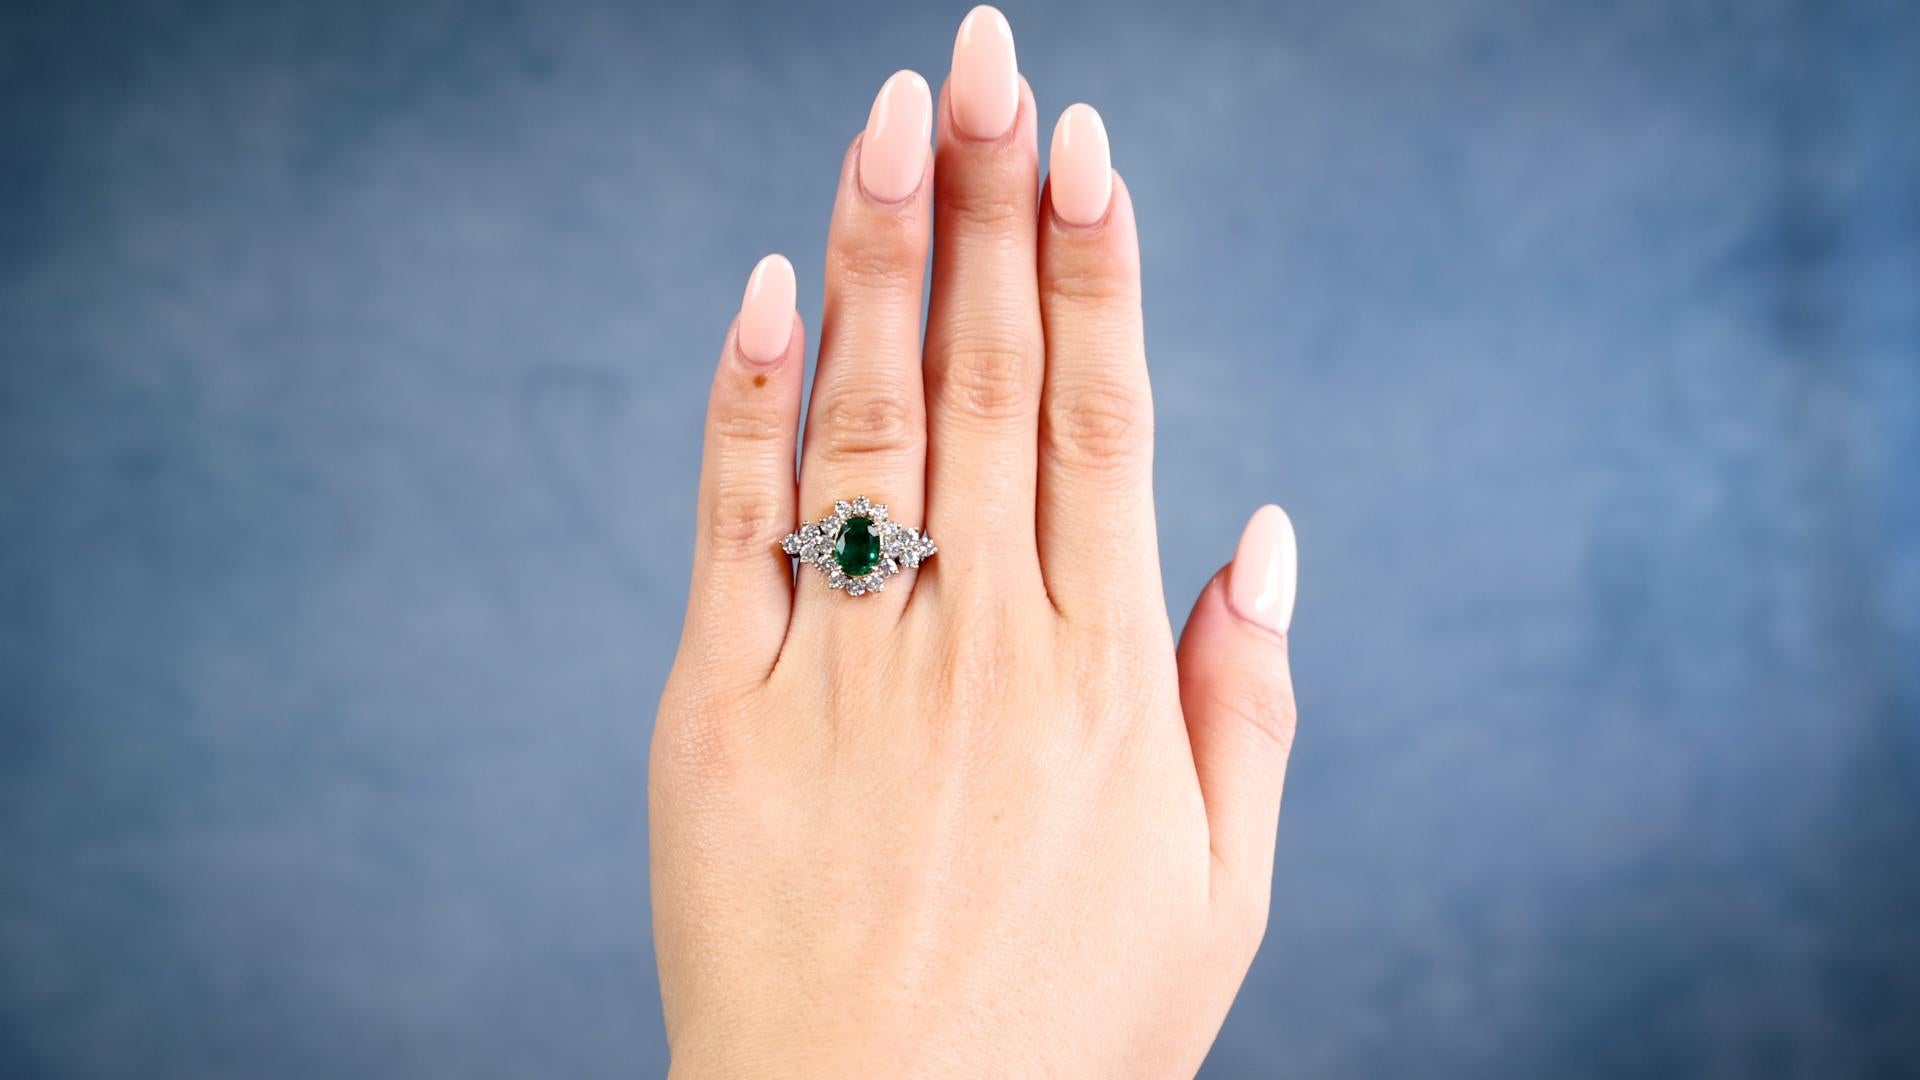 One Vintage 1.31 Carat Emerald and Diamond 18k Yellow Gold Cluster Ring. Featuring one oval mixed cut emerald of 1.31 carats. Accented by 18 round brilliant cut diamonds with a total weight of 0.94 carat, graded near-colorless, VS clarity. Crafted